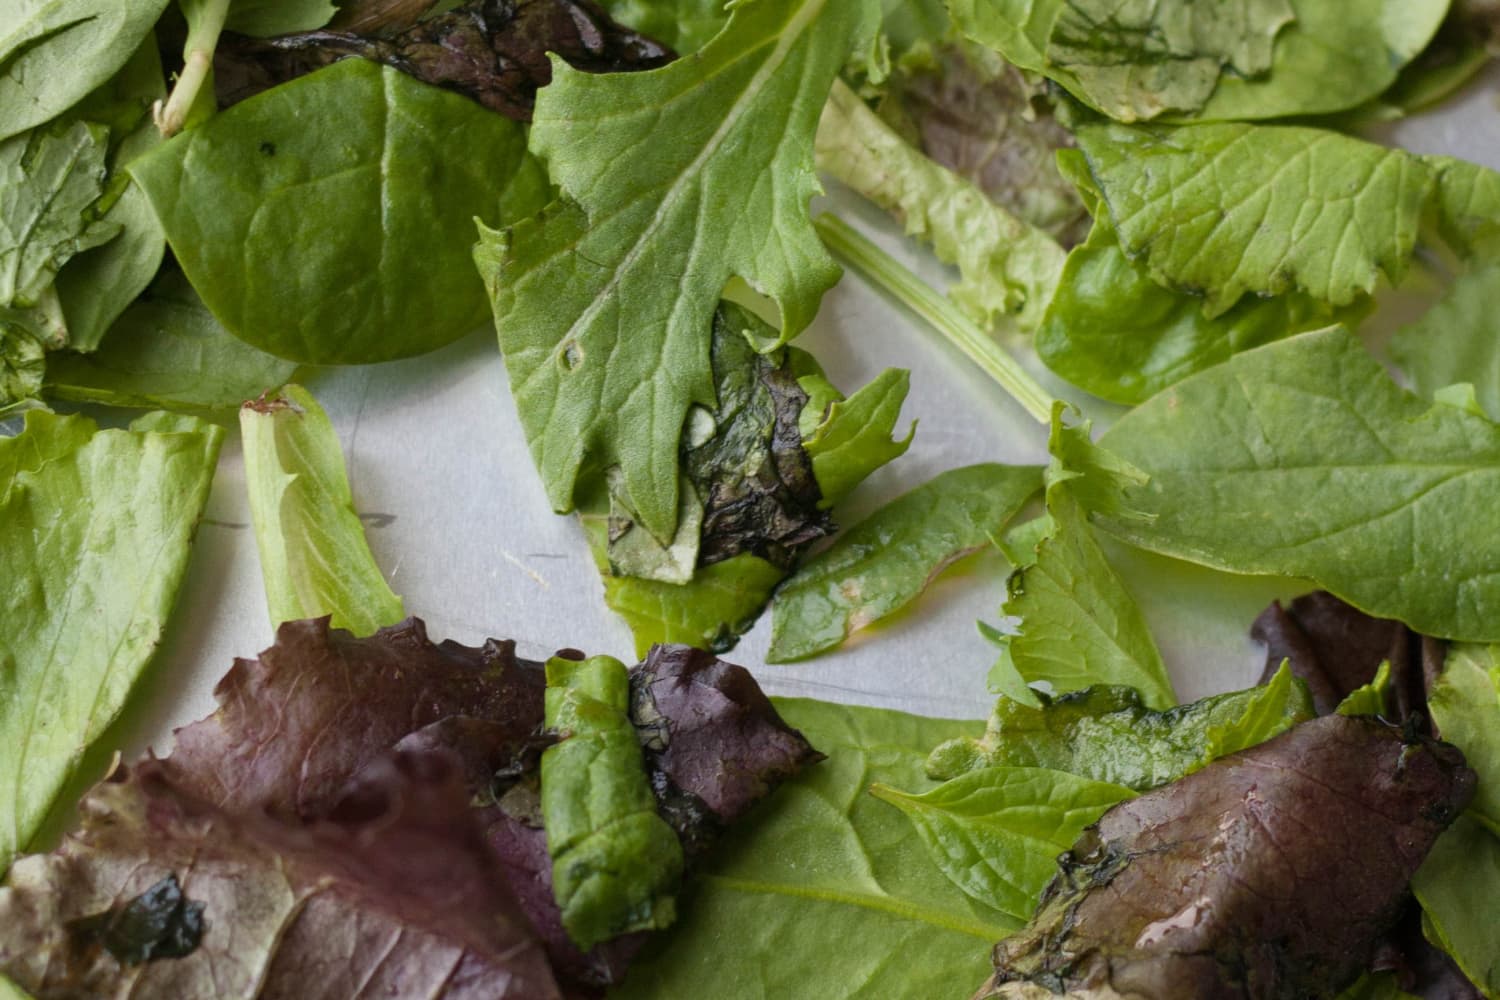 How to Store Lettuce So It Doesn't Wilt